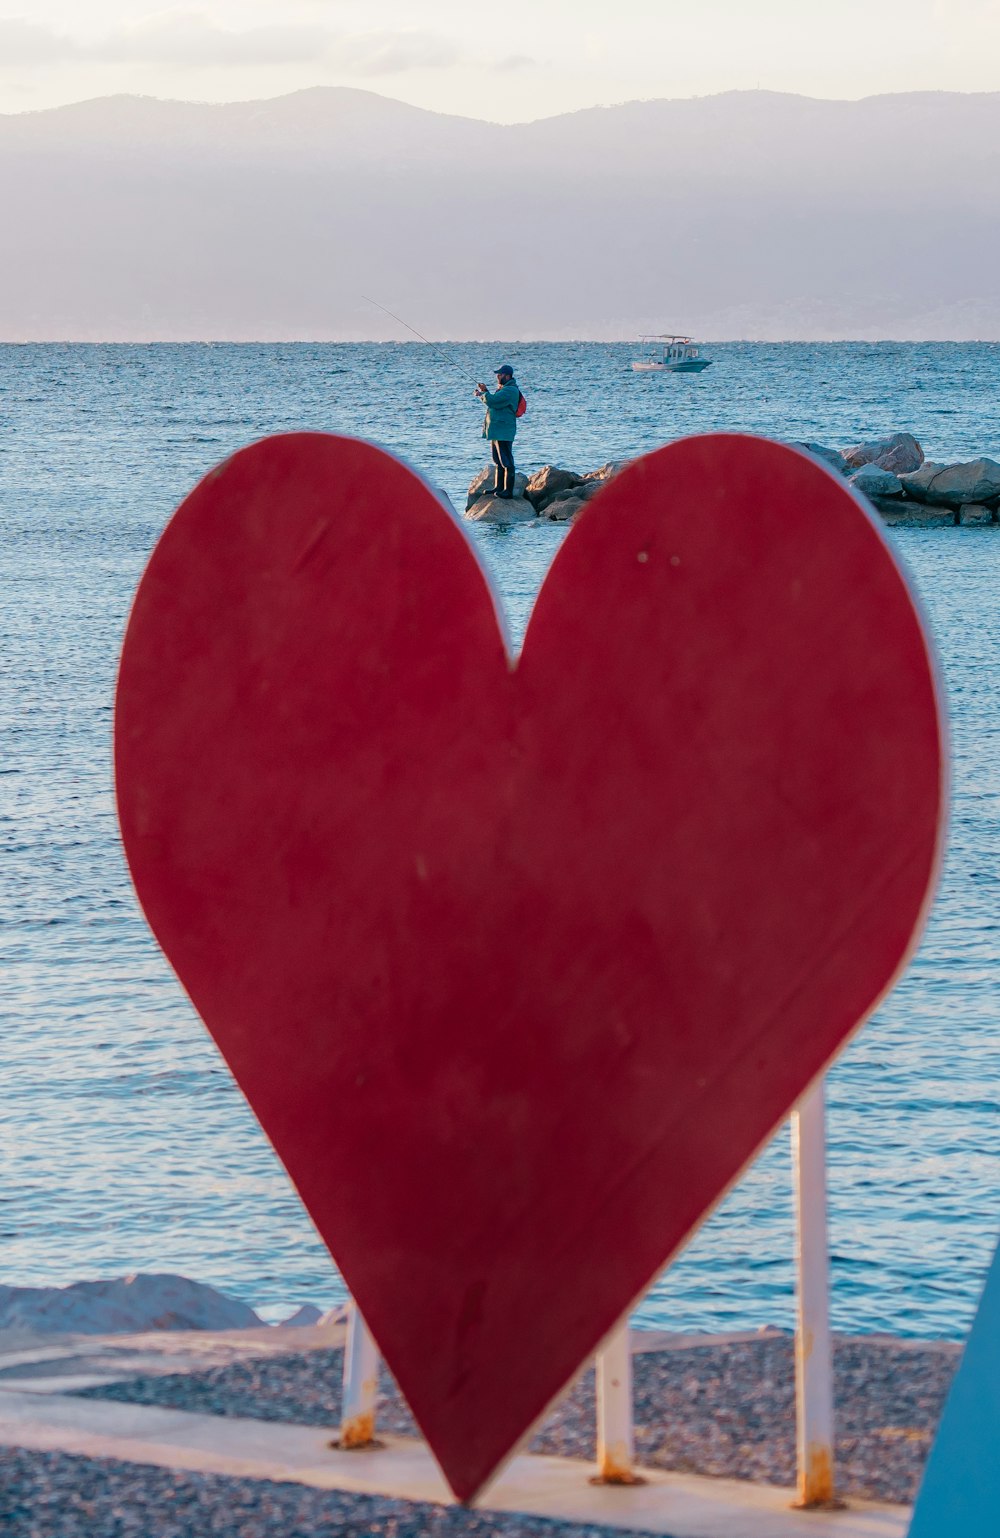 a red heart shaped object in front of a body of water